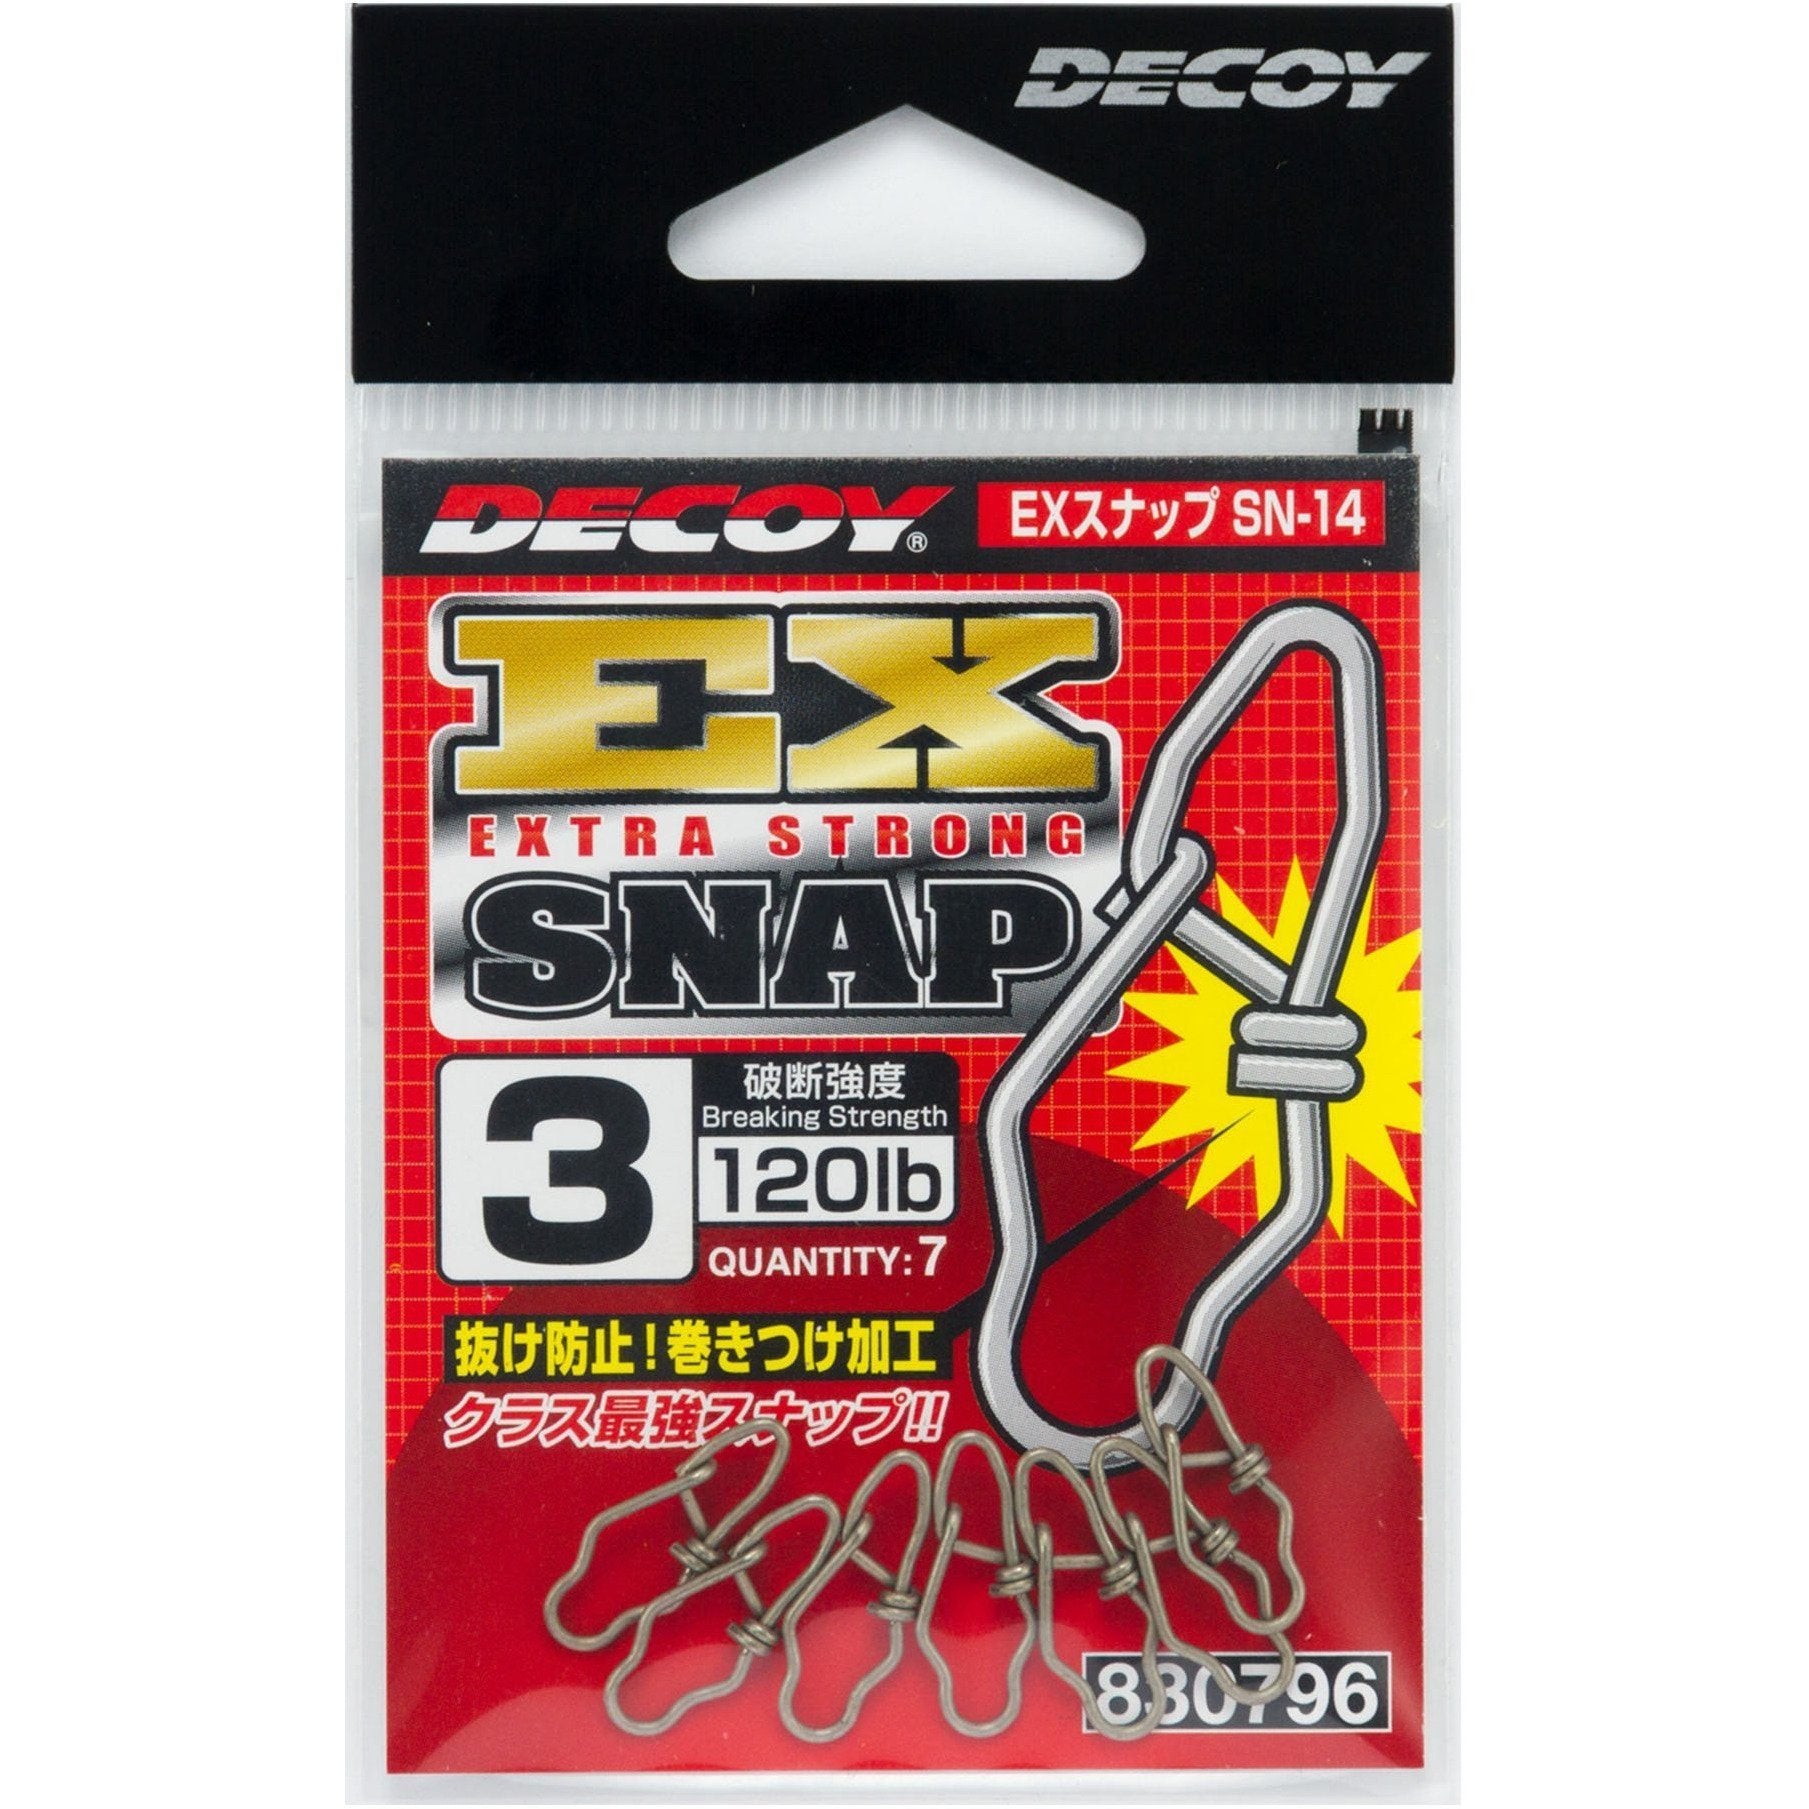 Snap - Decoy - EX Extra Strong SN-14 - The Fishermans Hut